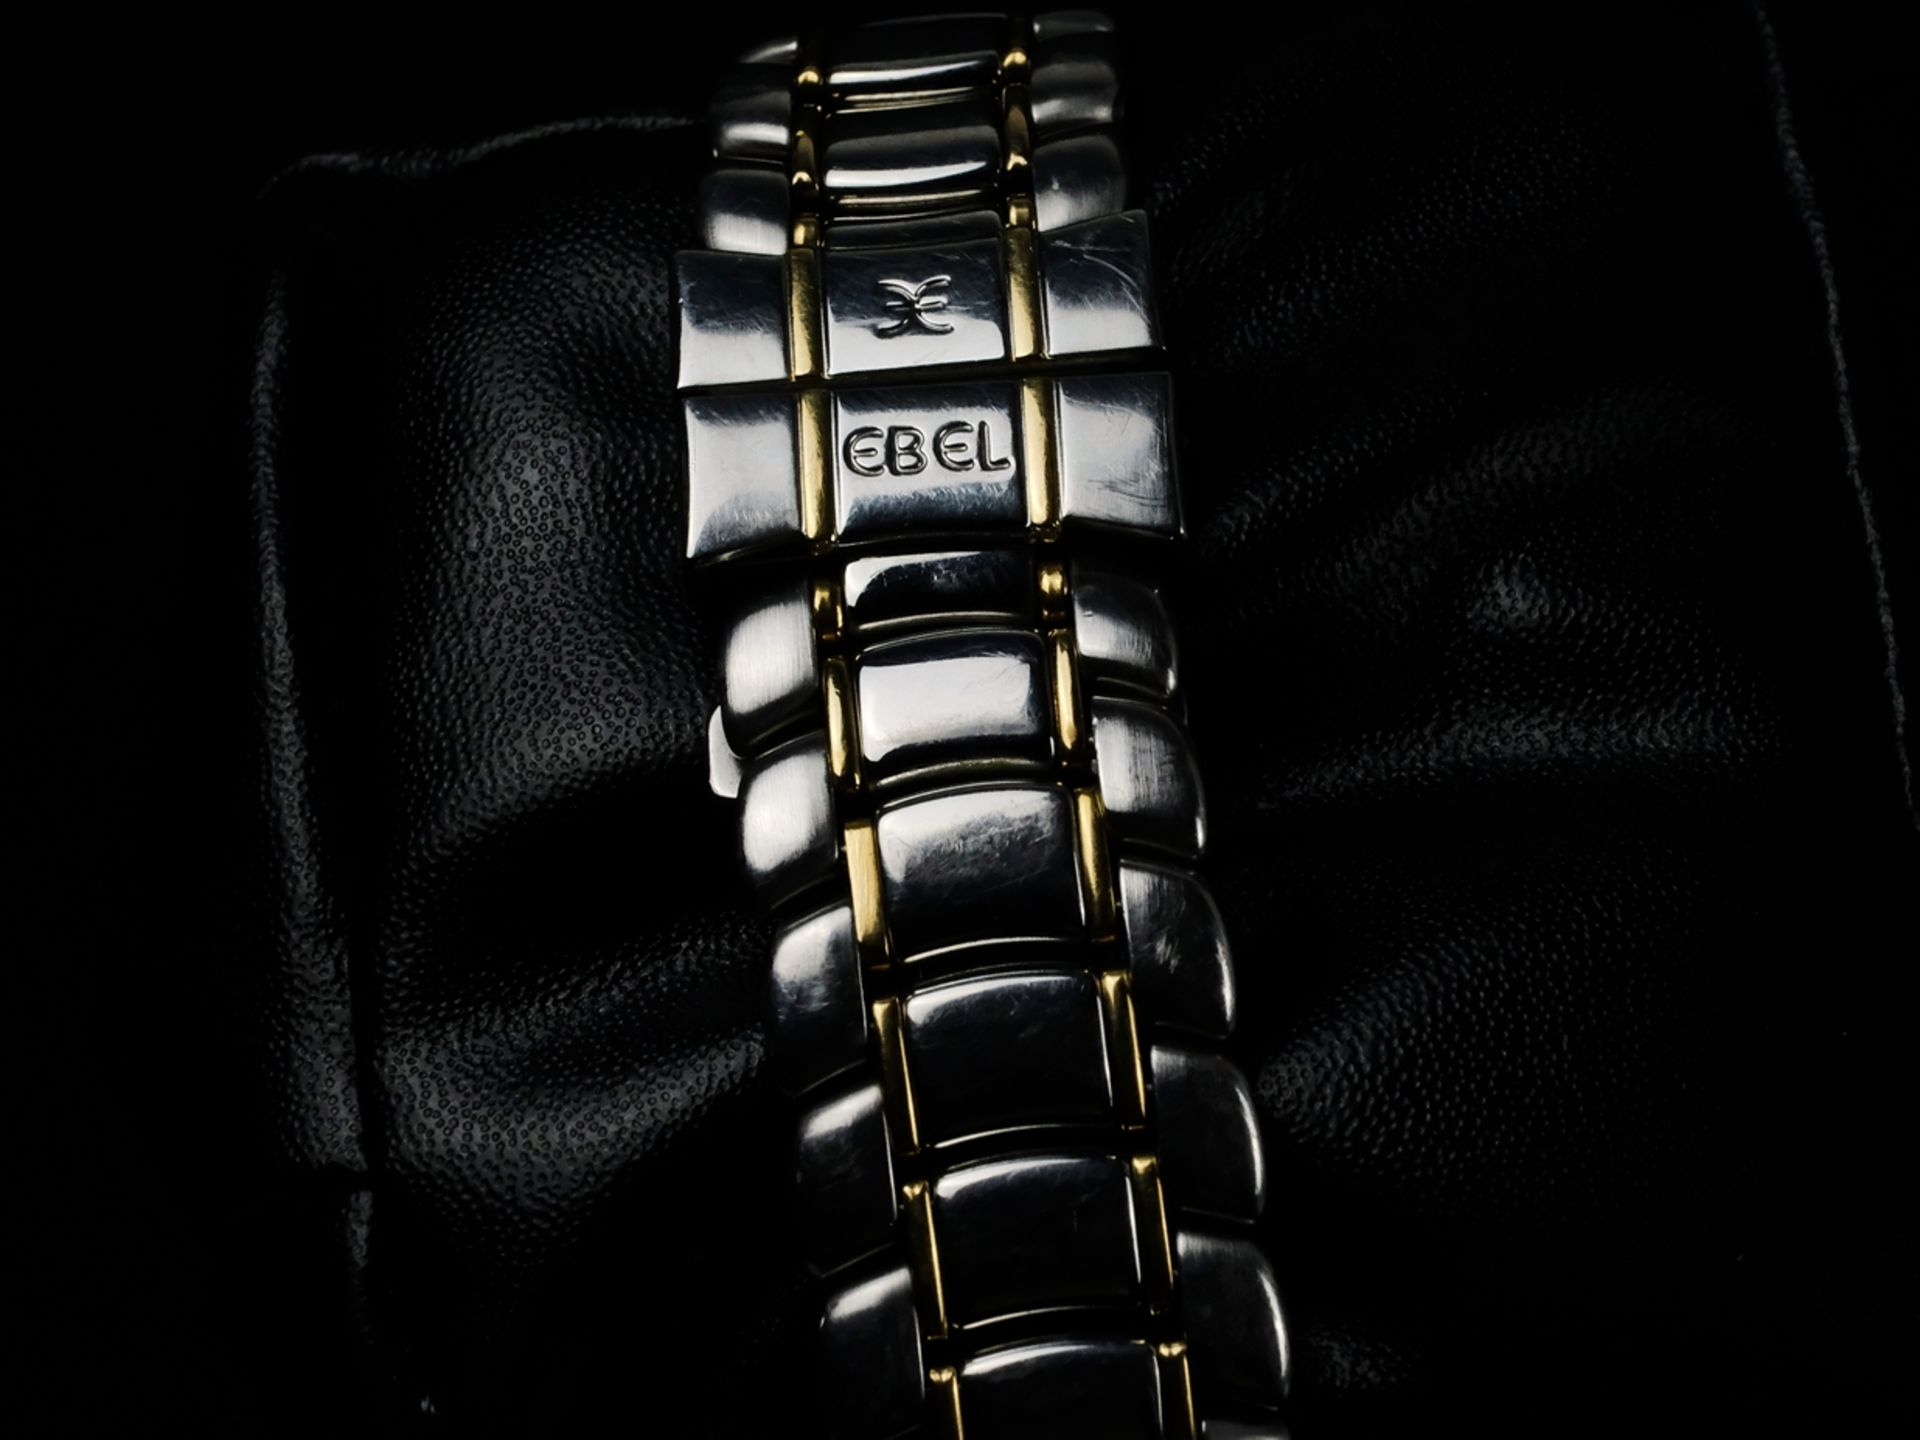 EBEL WATCH "Discovery", black dial with white Arabic numerals, white geometric hands, D 4cm, quartz - Image 3 of 7